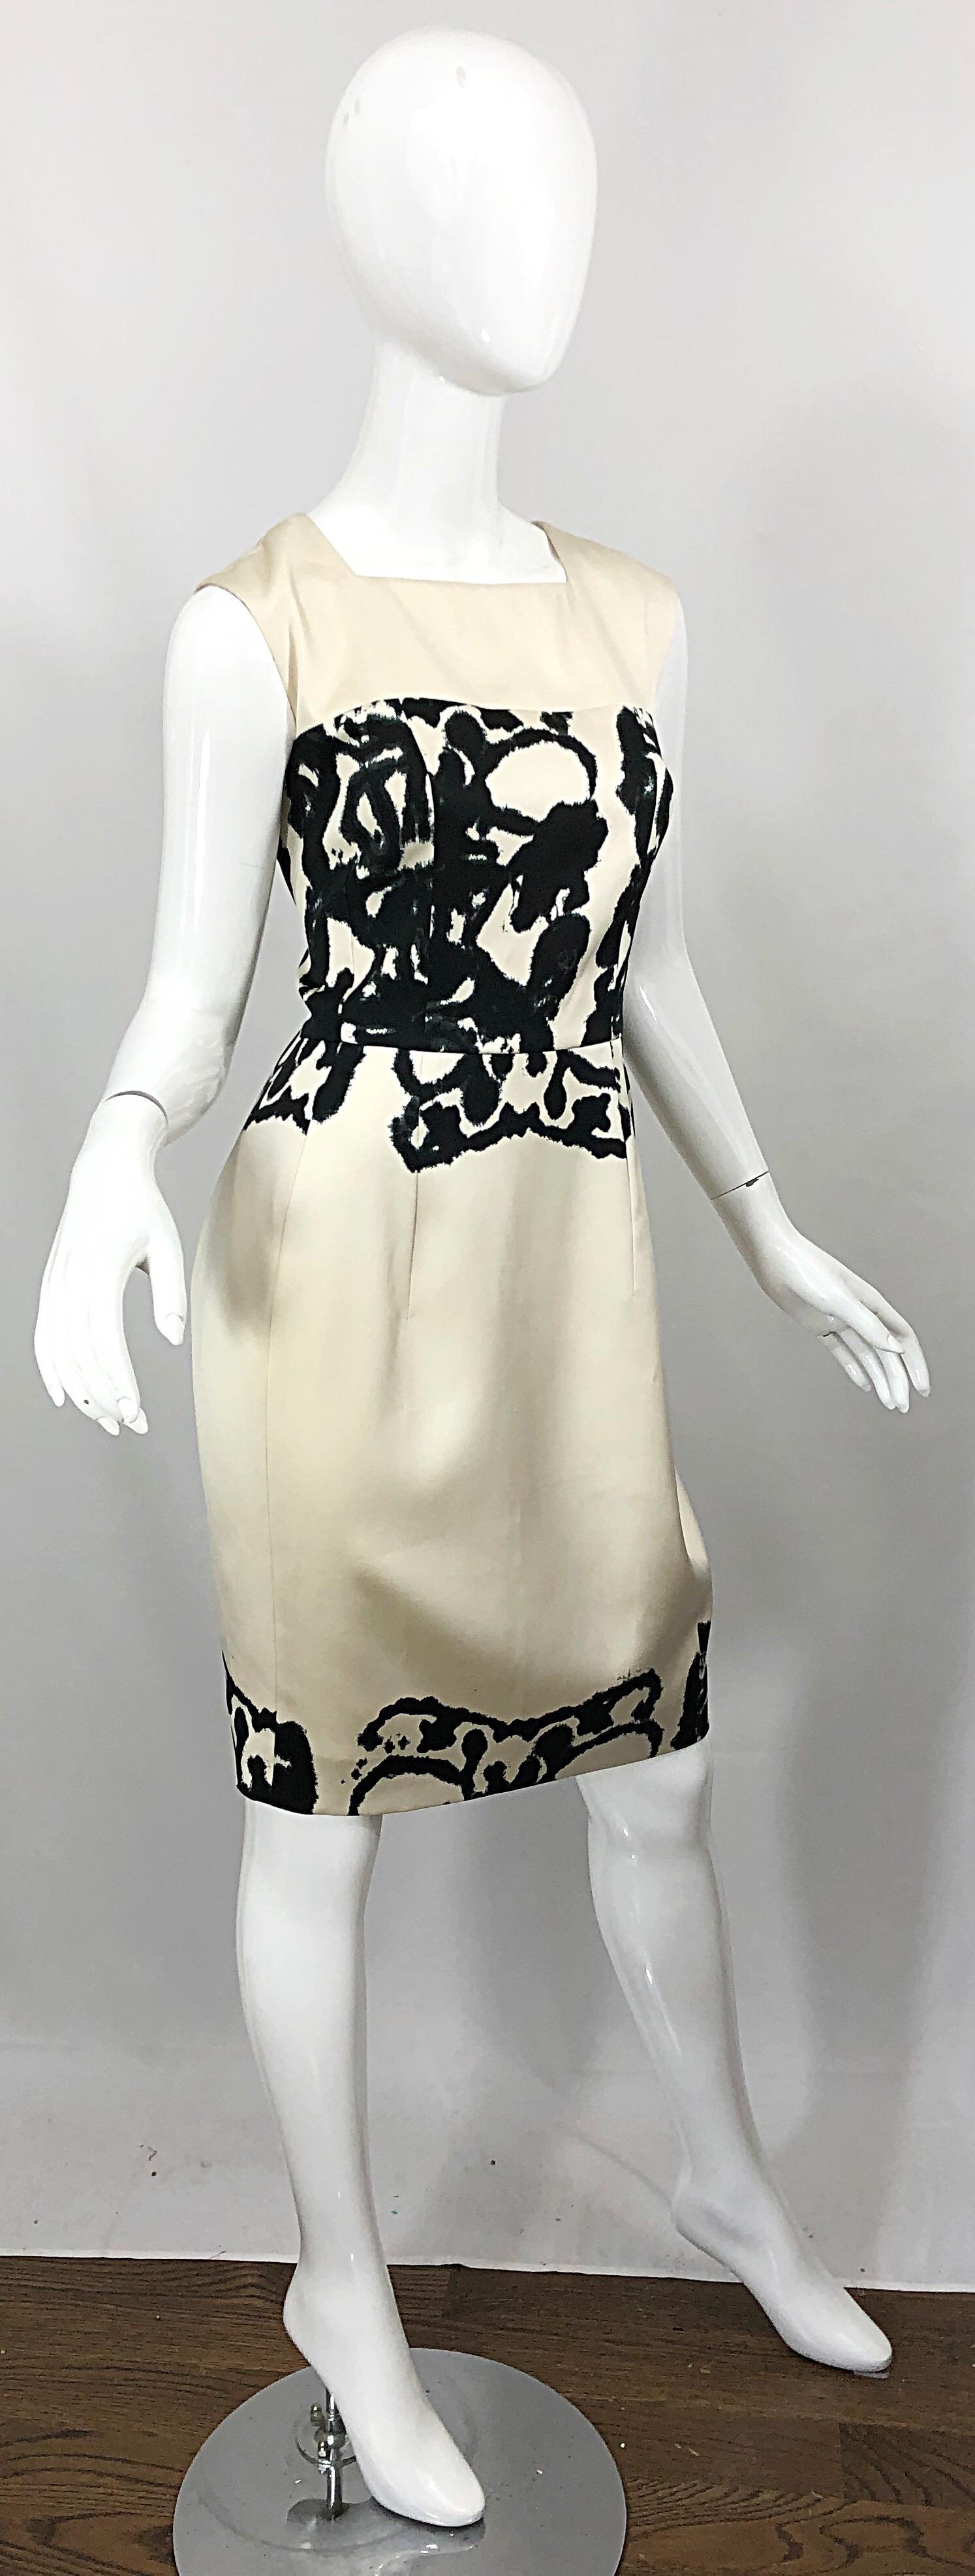 New Yves Saint Laurent Size 42 / 8-10 Ivory and Black Abstract Print Silk Dress 8